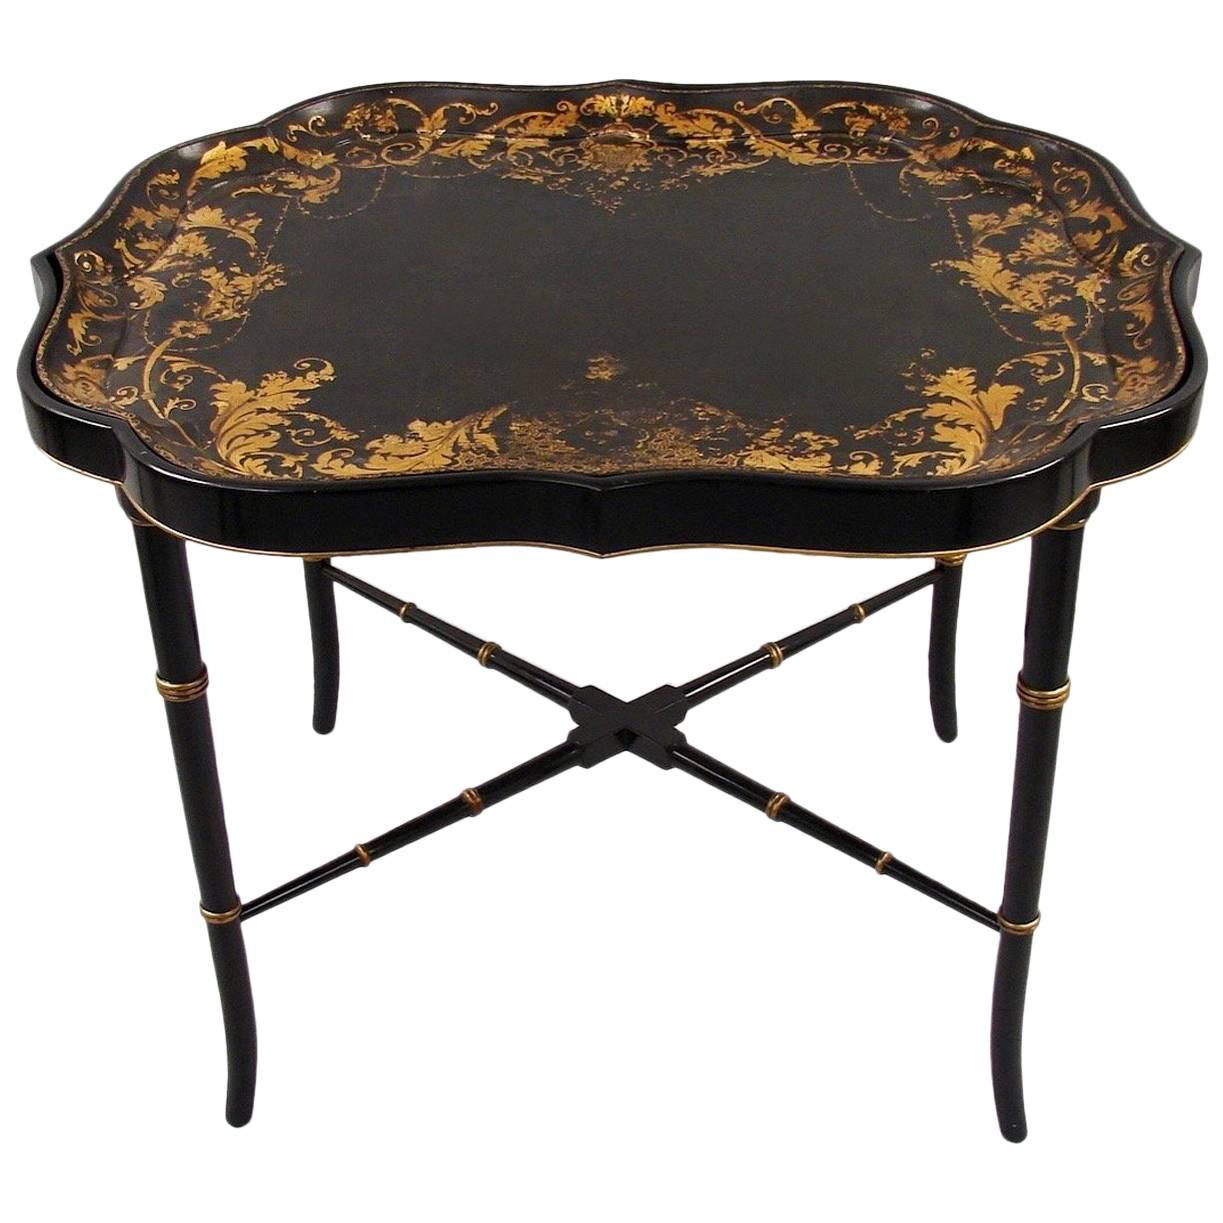 English Victorian Scalloped Edge Gilt and Papier Mache Tray on Stand